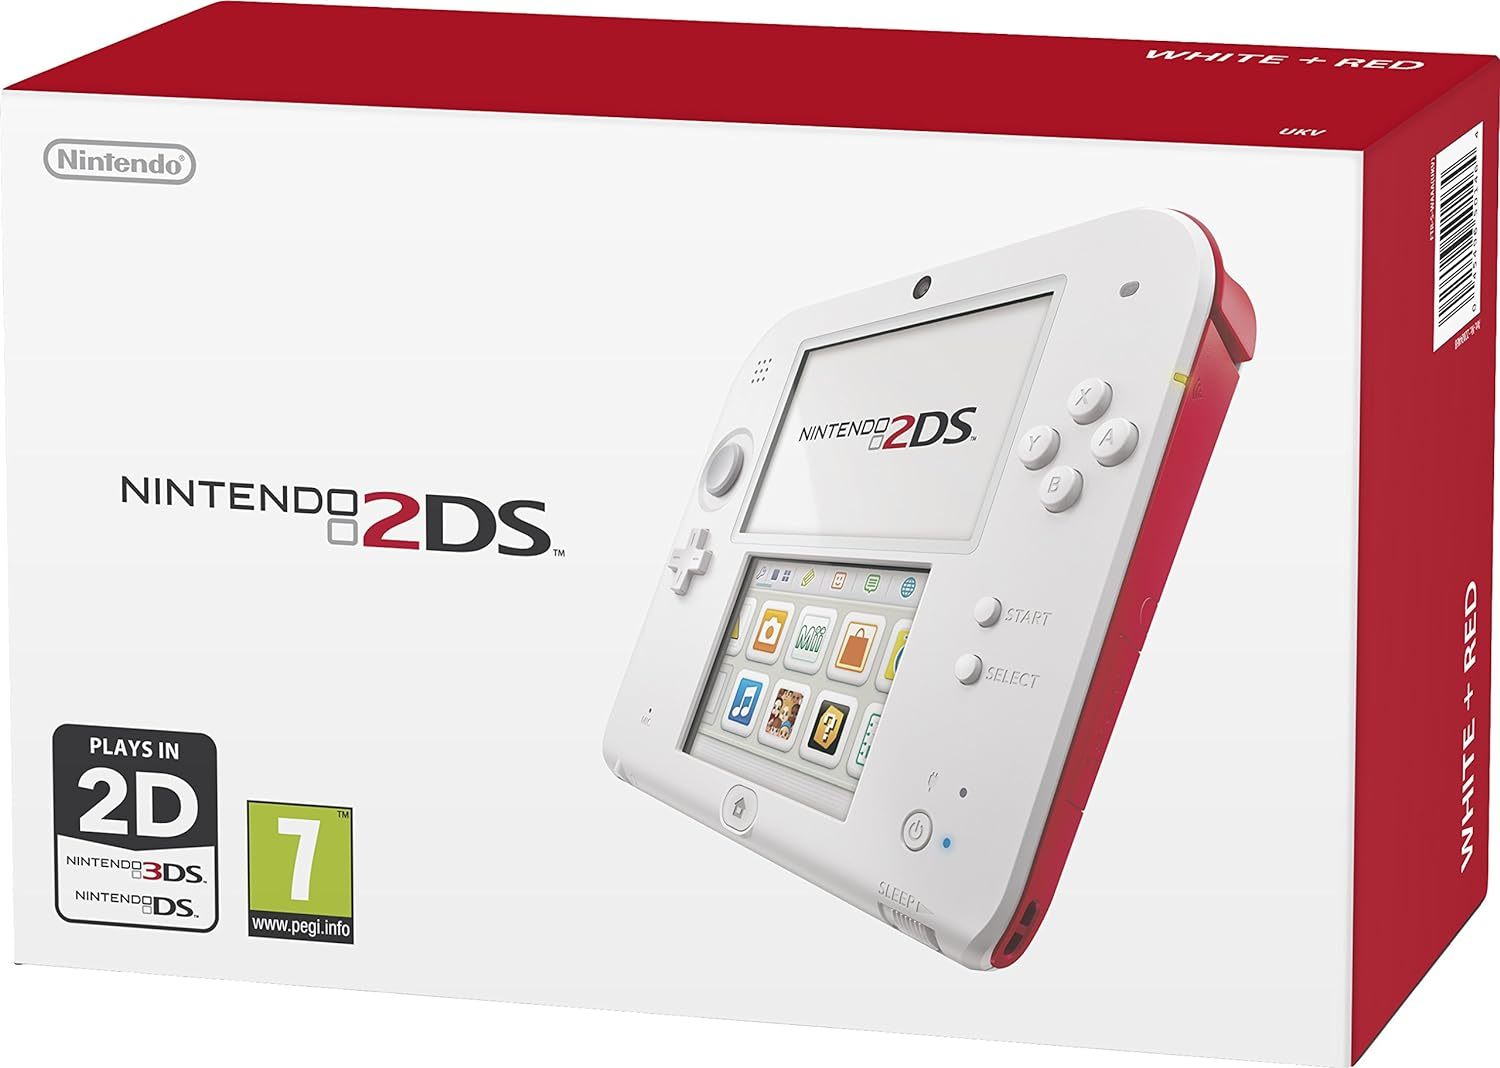 Nintendo Handheld Console 2Ds - White/Red - $215.99